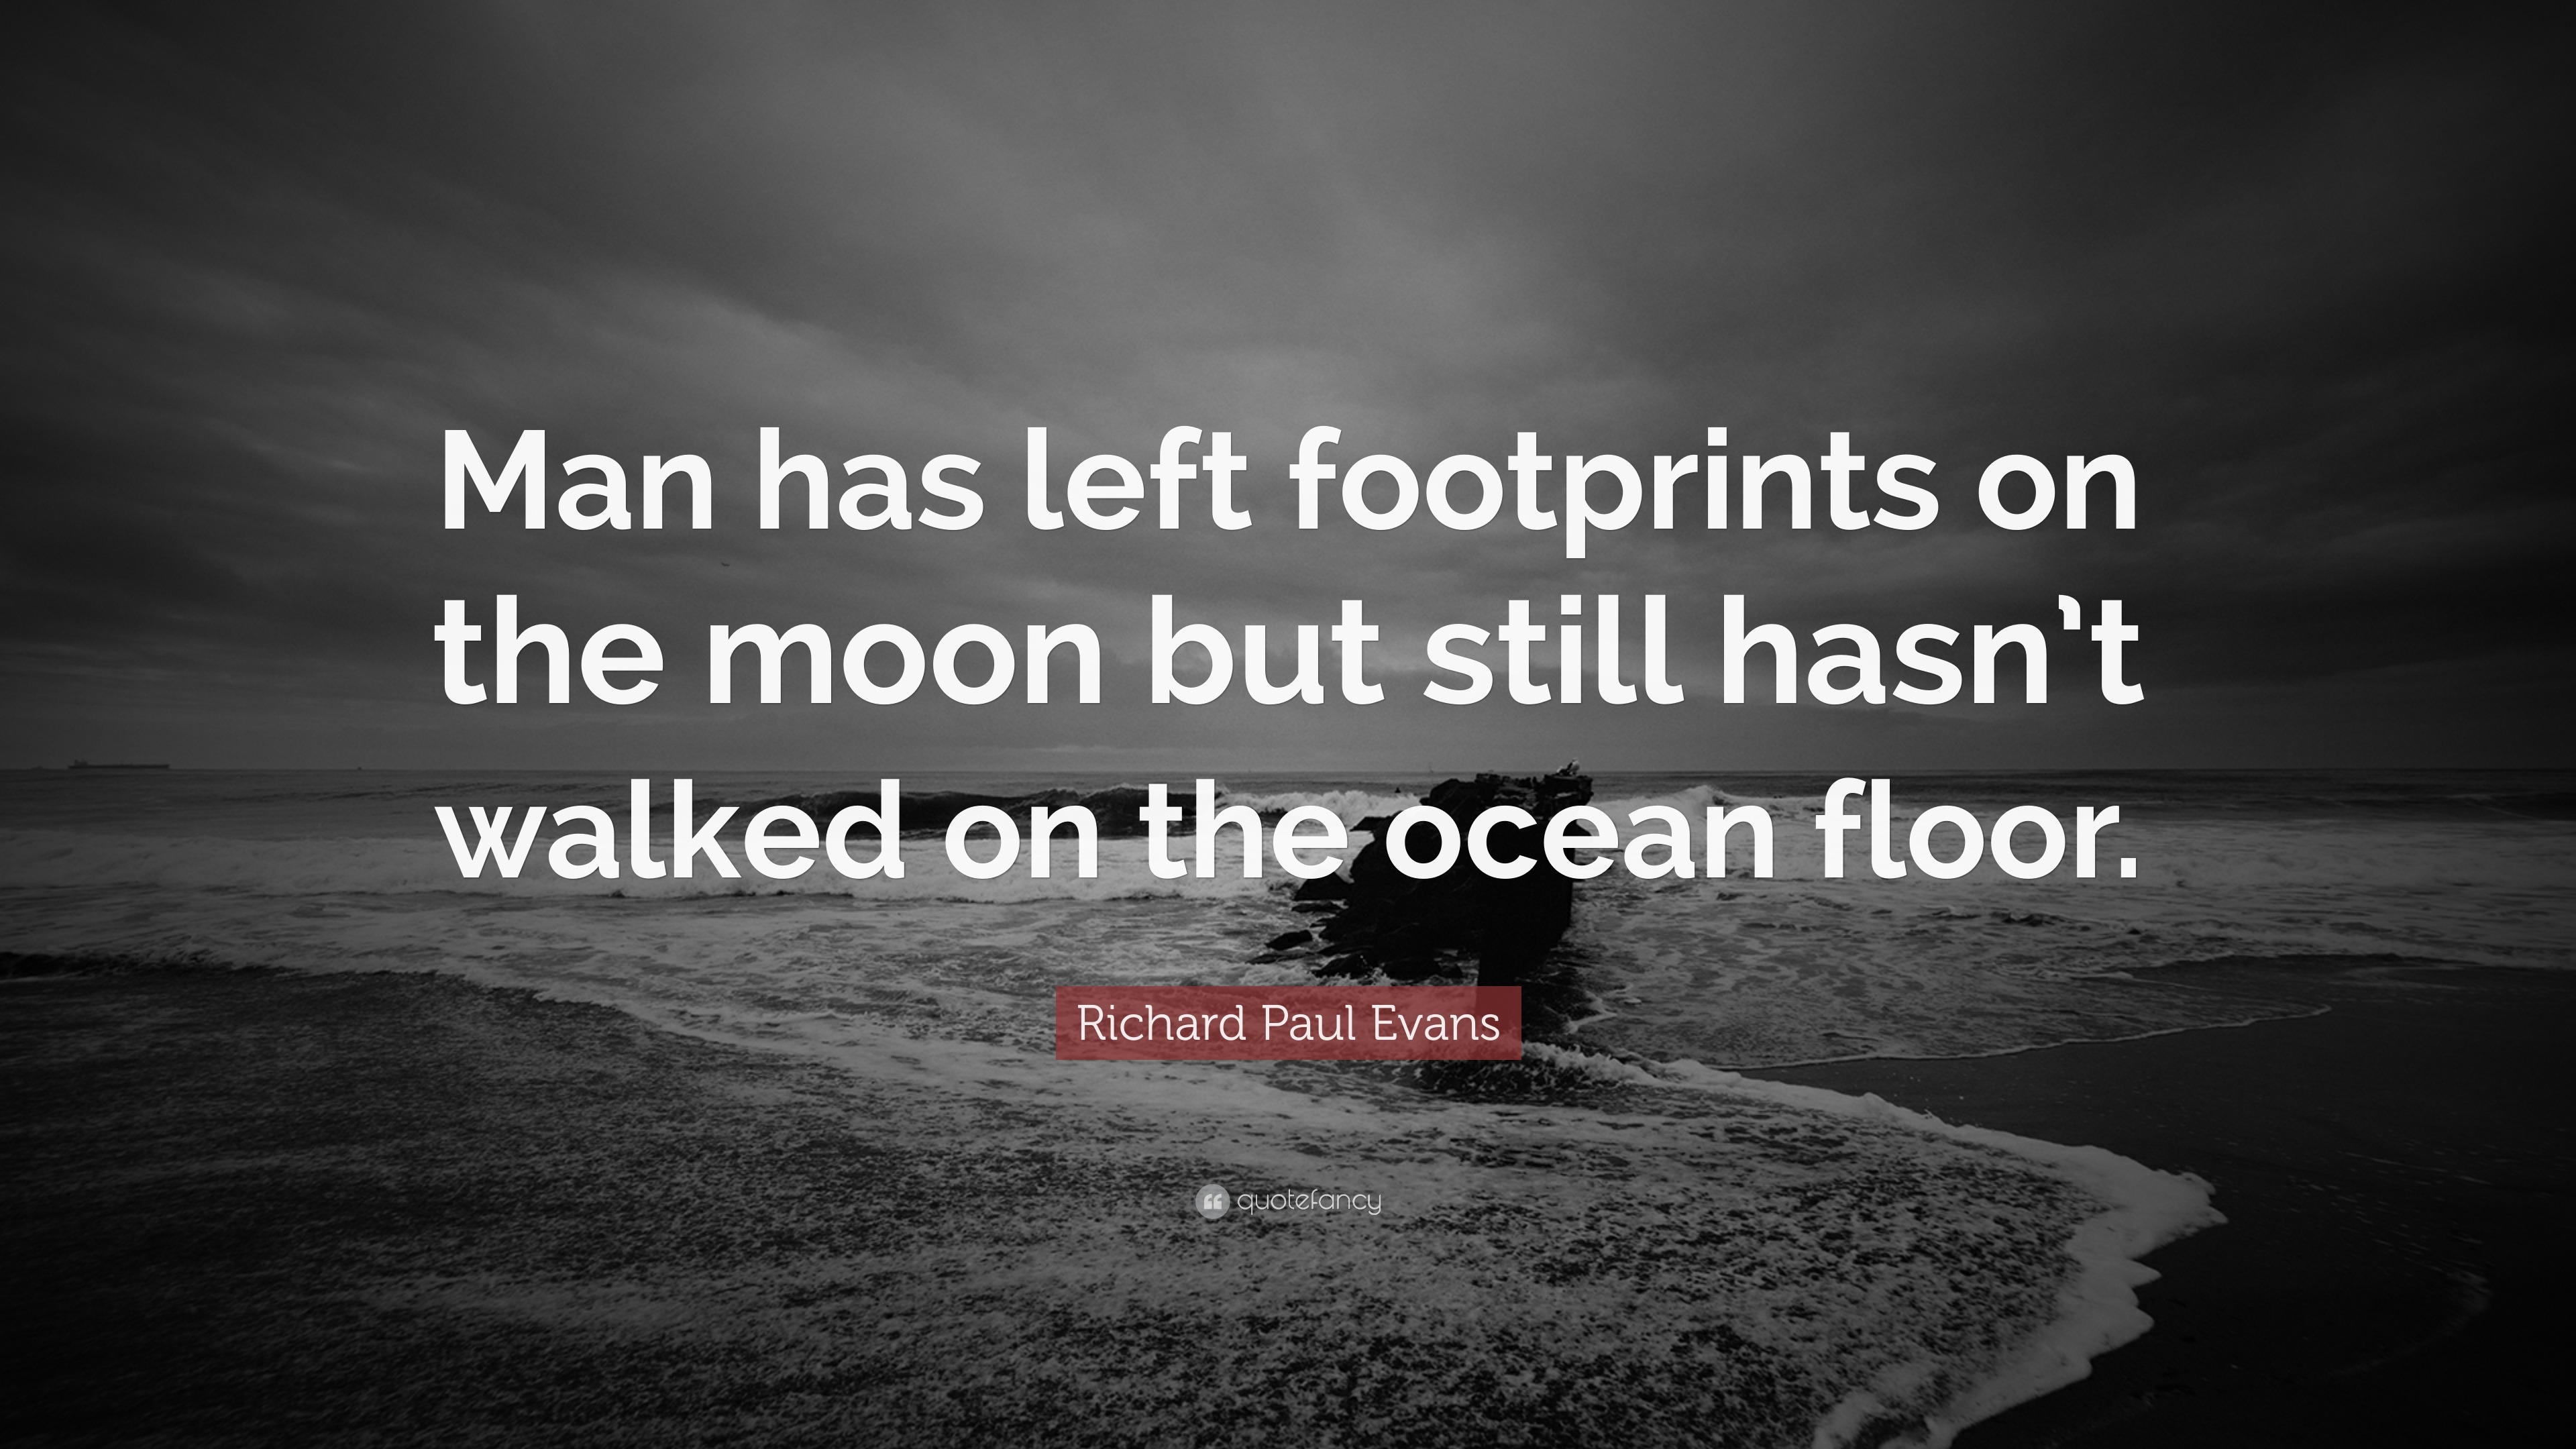 Footprints On The Moon Quote / Logic How Sky Can Be The Limit When